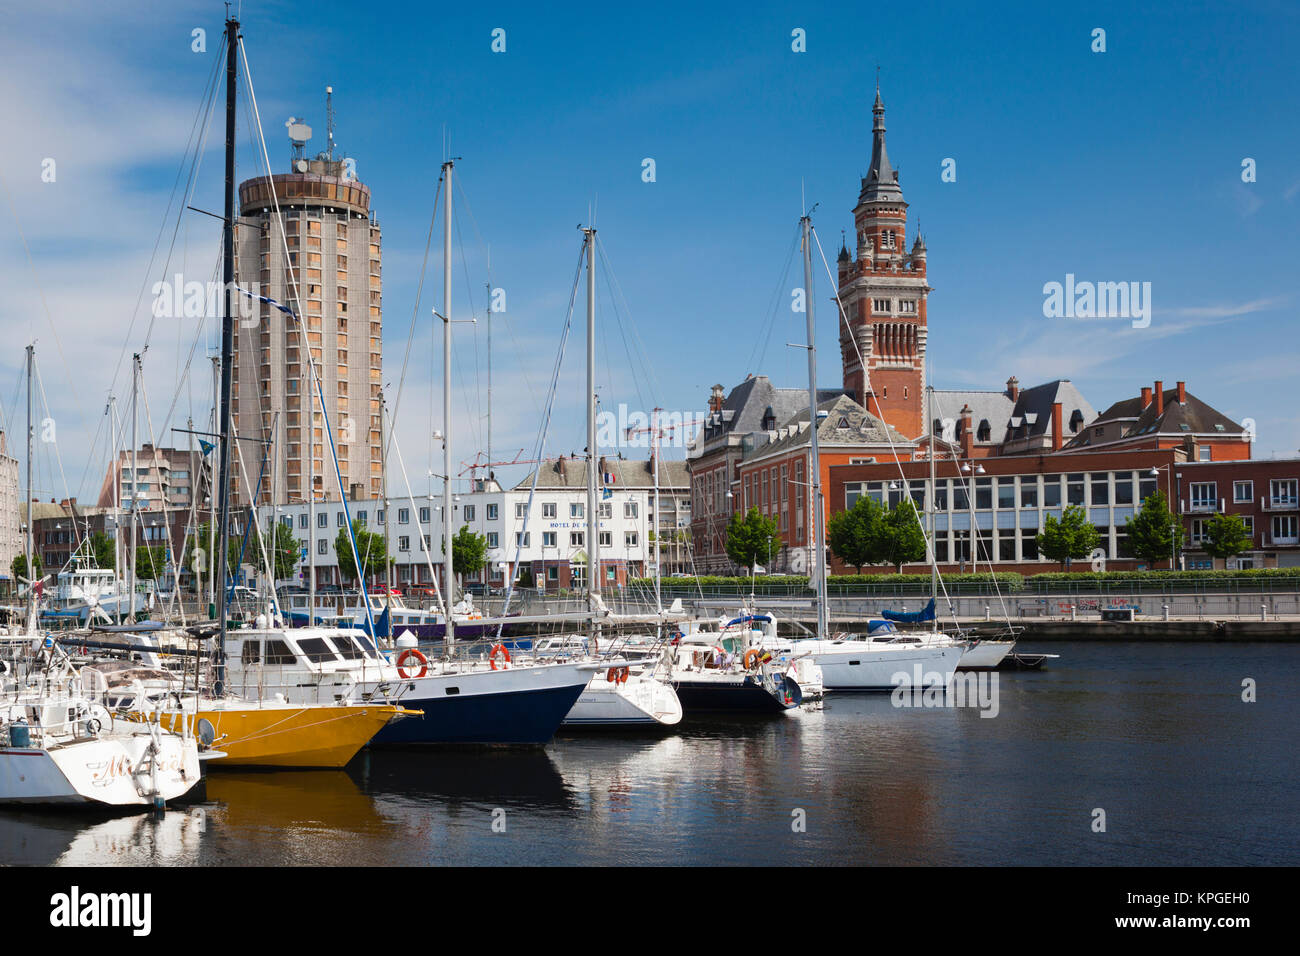 France, Nord, French Flanders, Dunkerque, Bassin du Commerce marina and town hall tower. Stock Photo